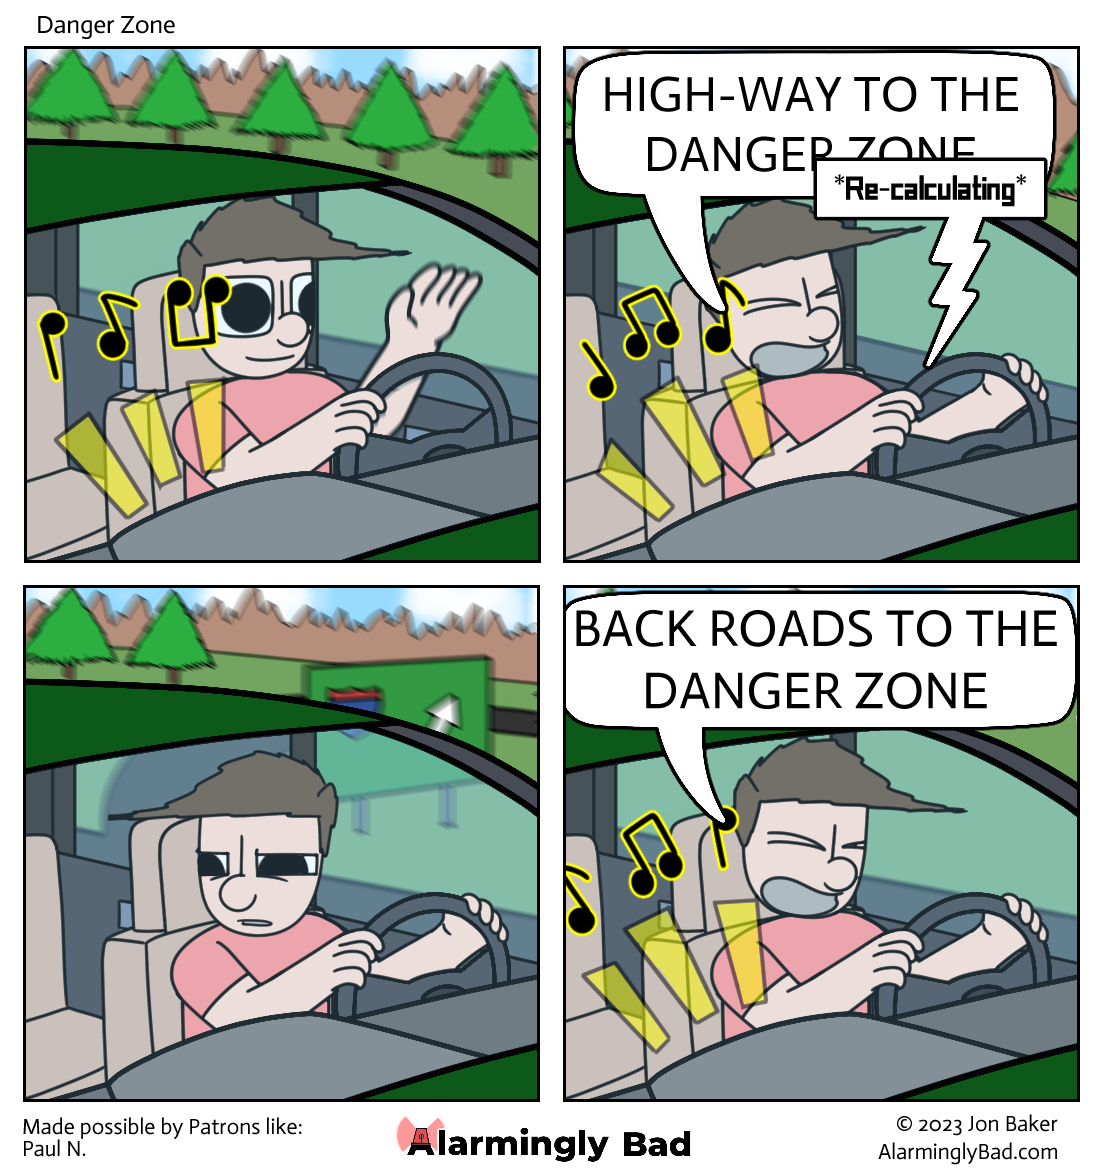 Look at the road, dude.